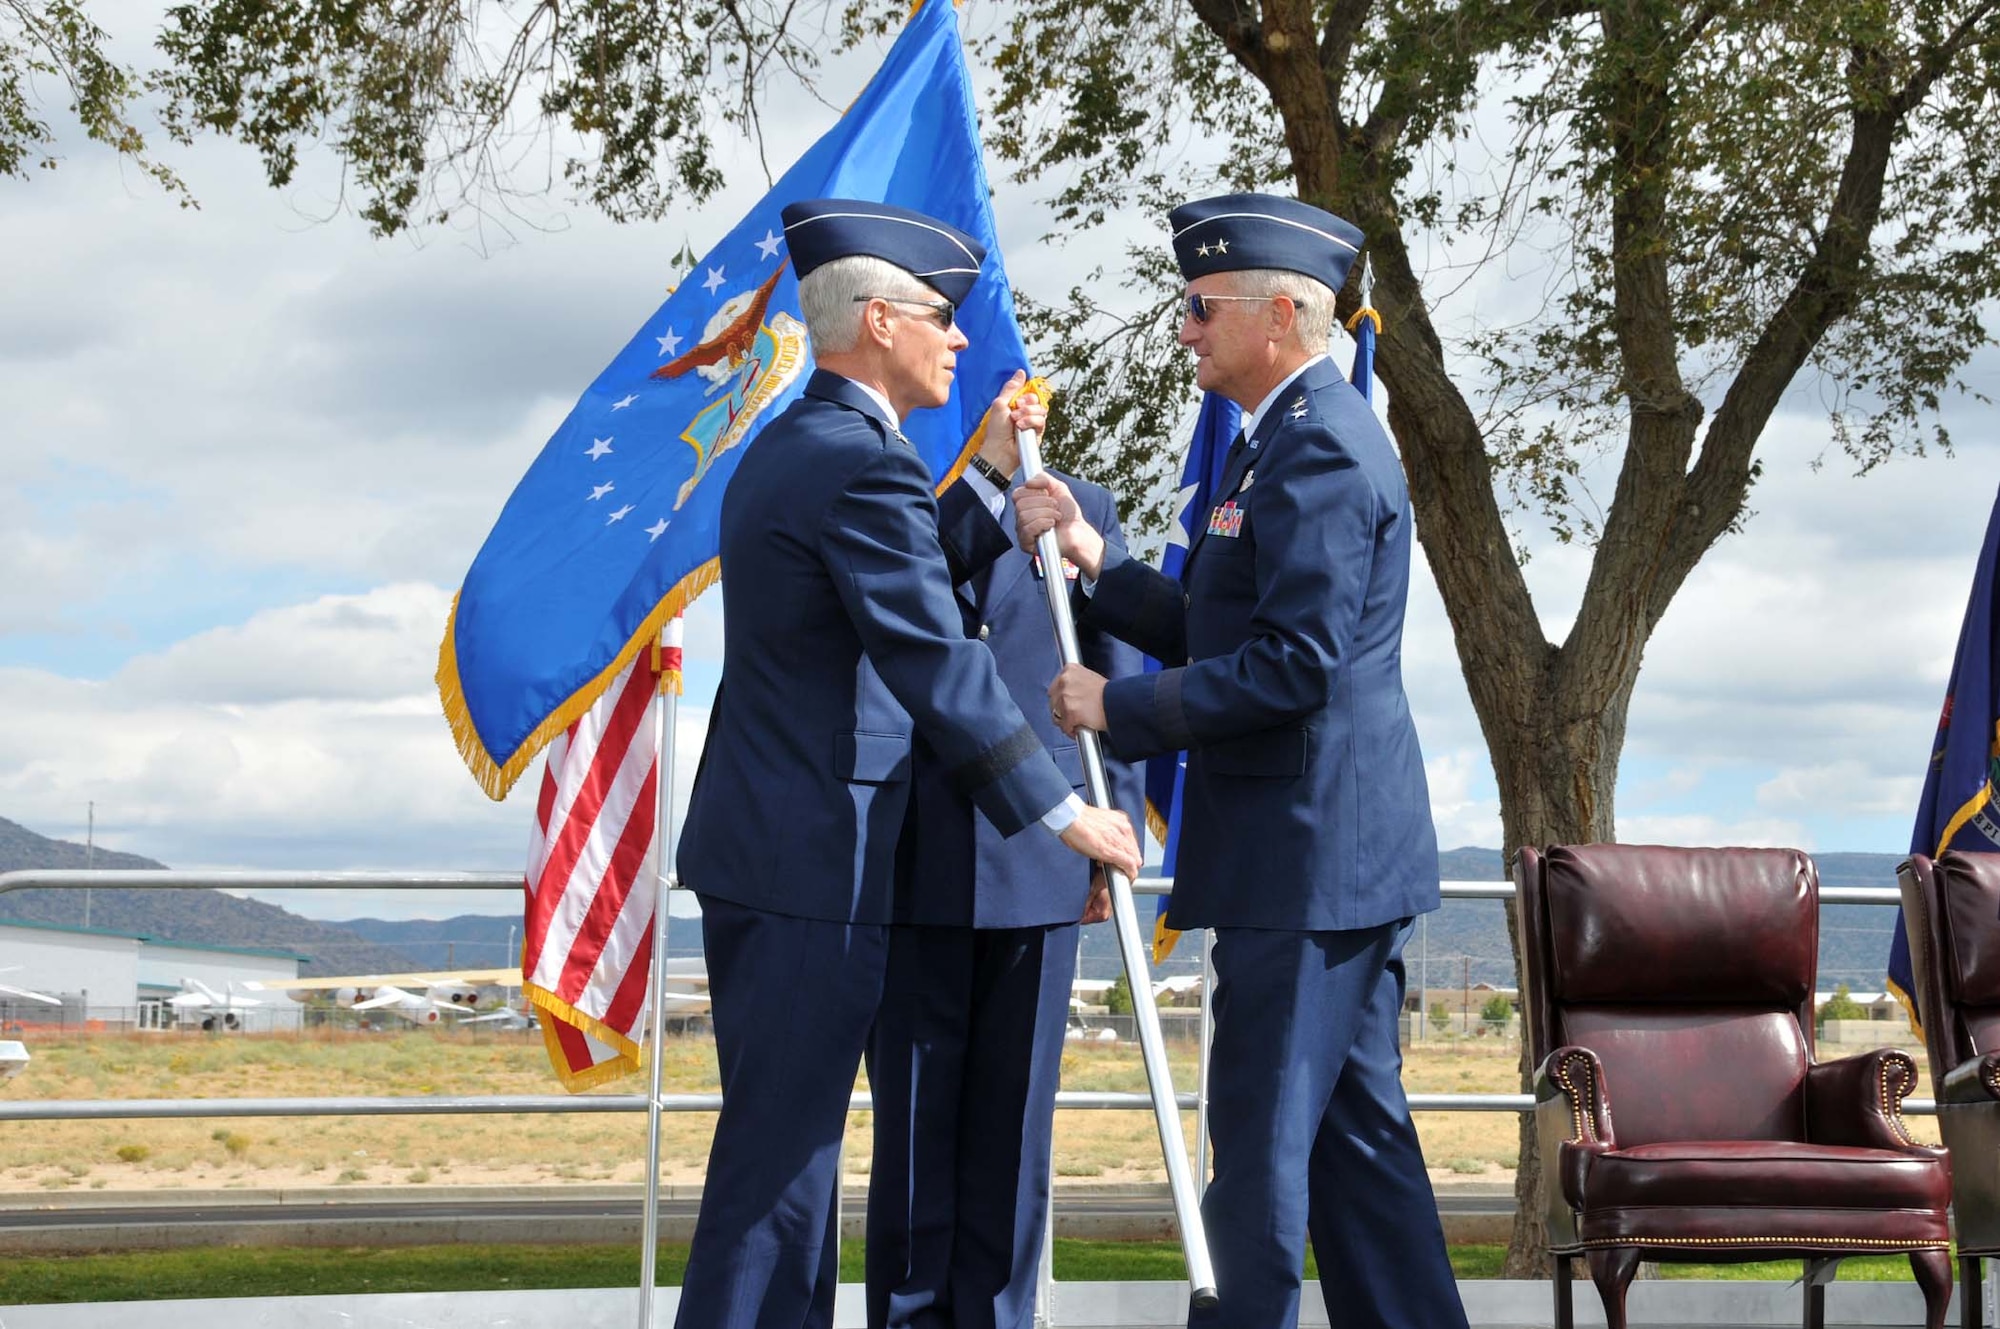 The Assistant Vice Chief of Staff of the Air Force Lt. Gen. William L. Shelton gives command of the Air Force Operational Test and Evaluation Center to Maj. Gen. David J. Eichhorn.
